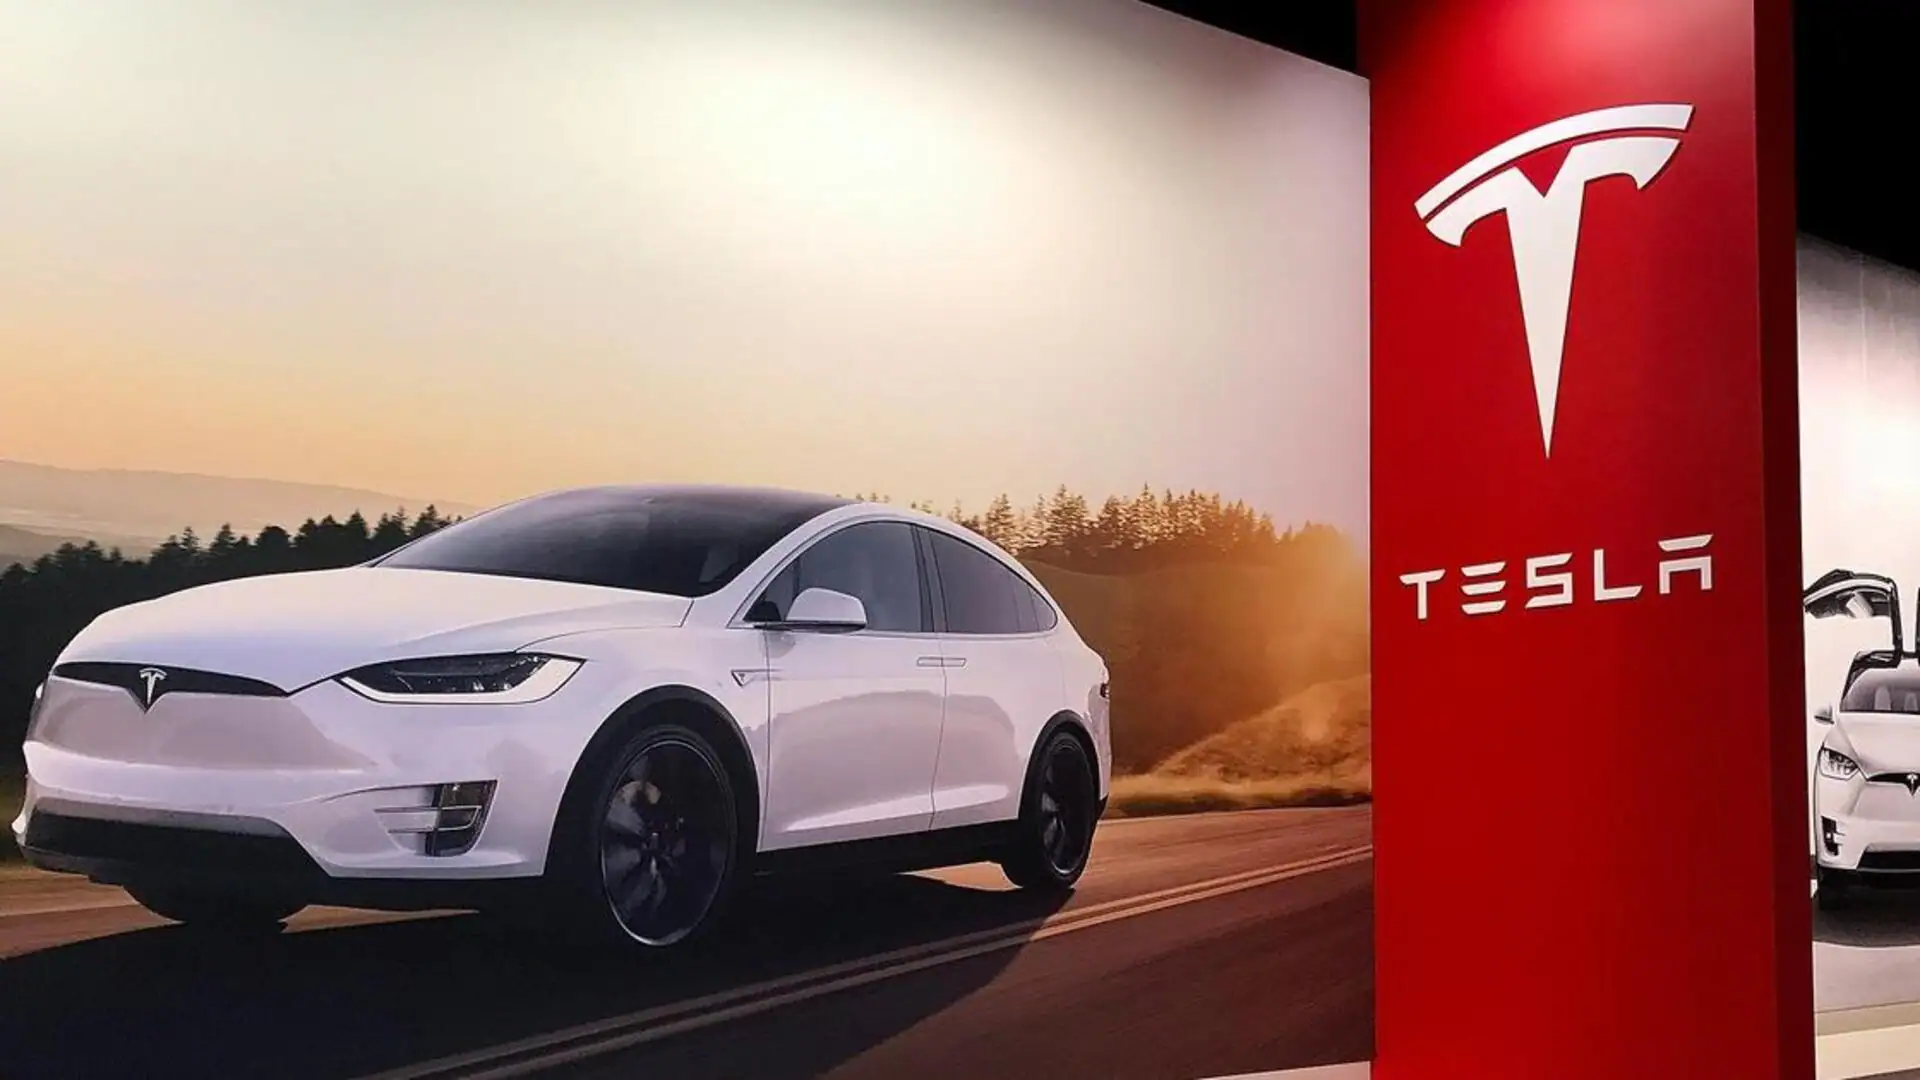 Save $4,000 on the Tesla FSD in the US Without Enhanced Autopilot